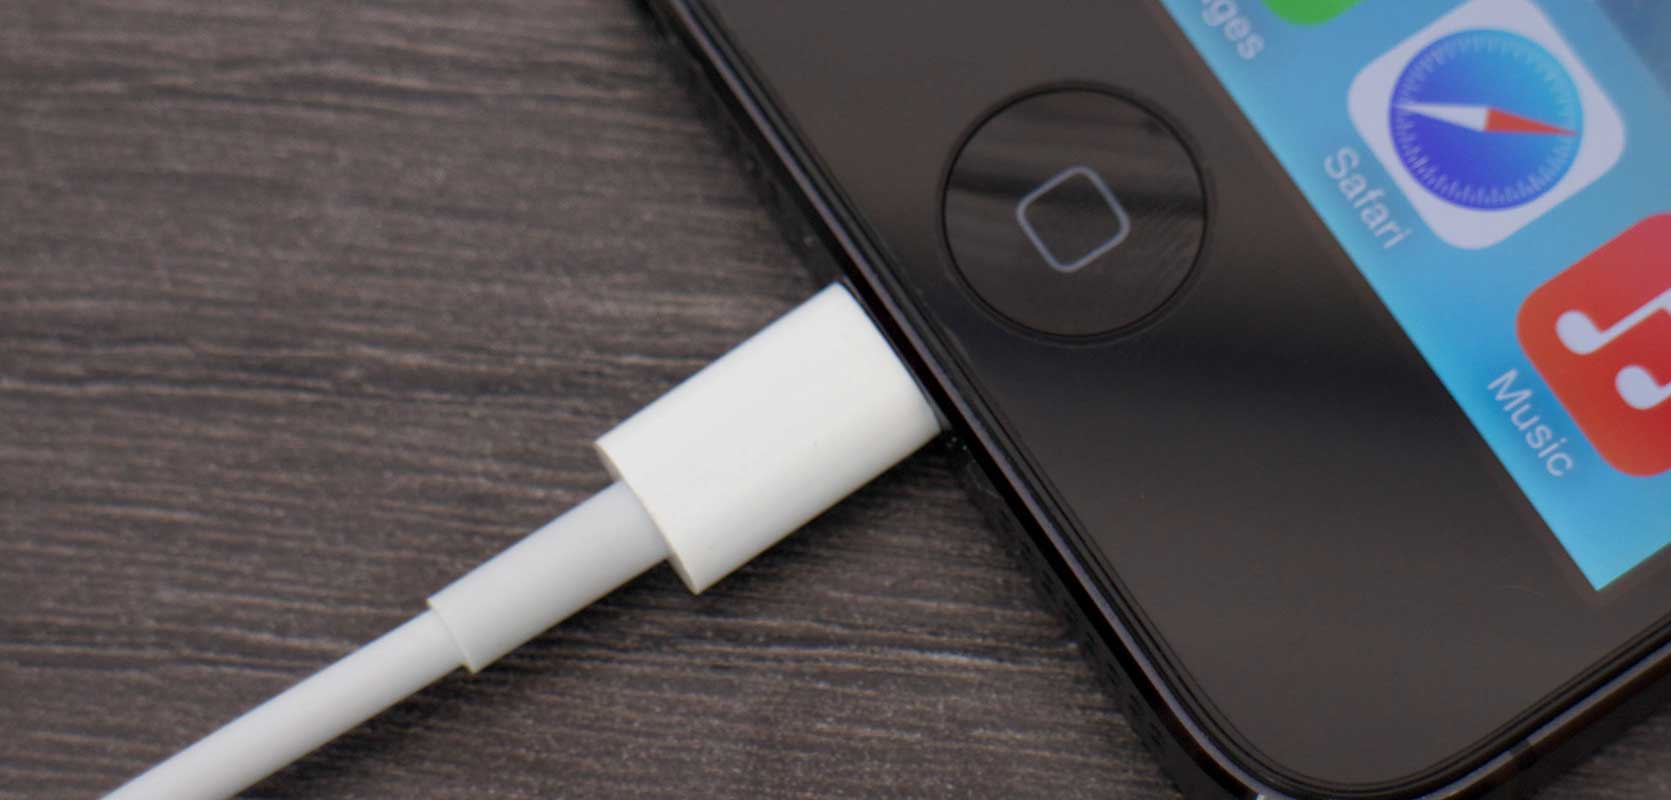 01-iphone-charging-tips